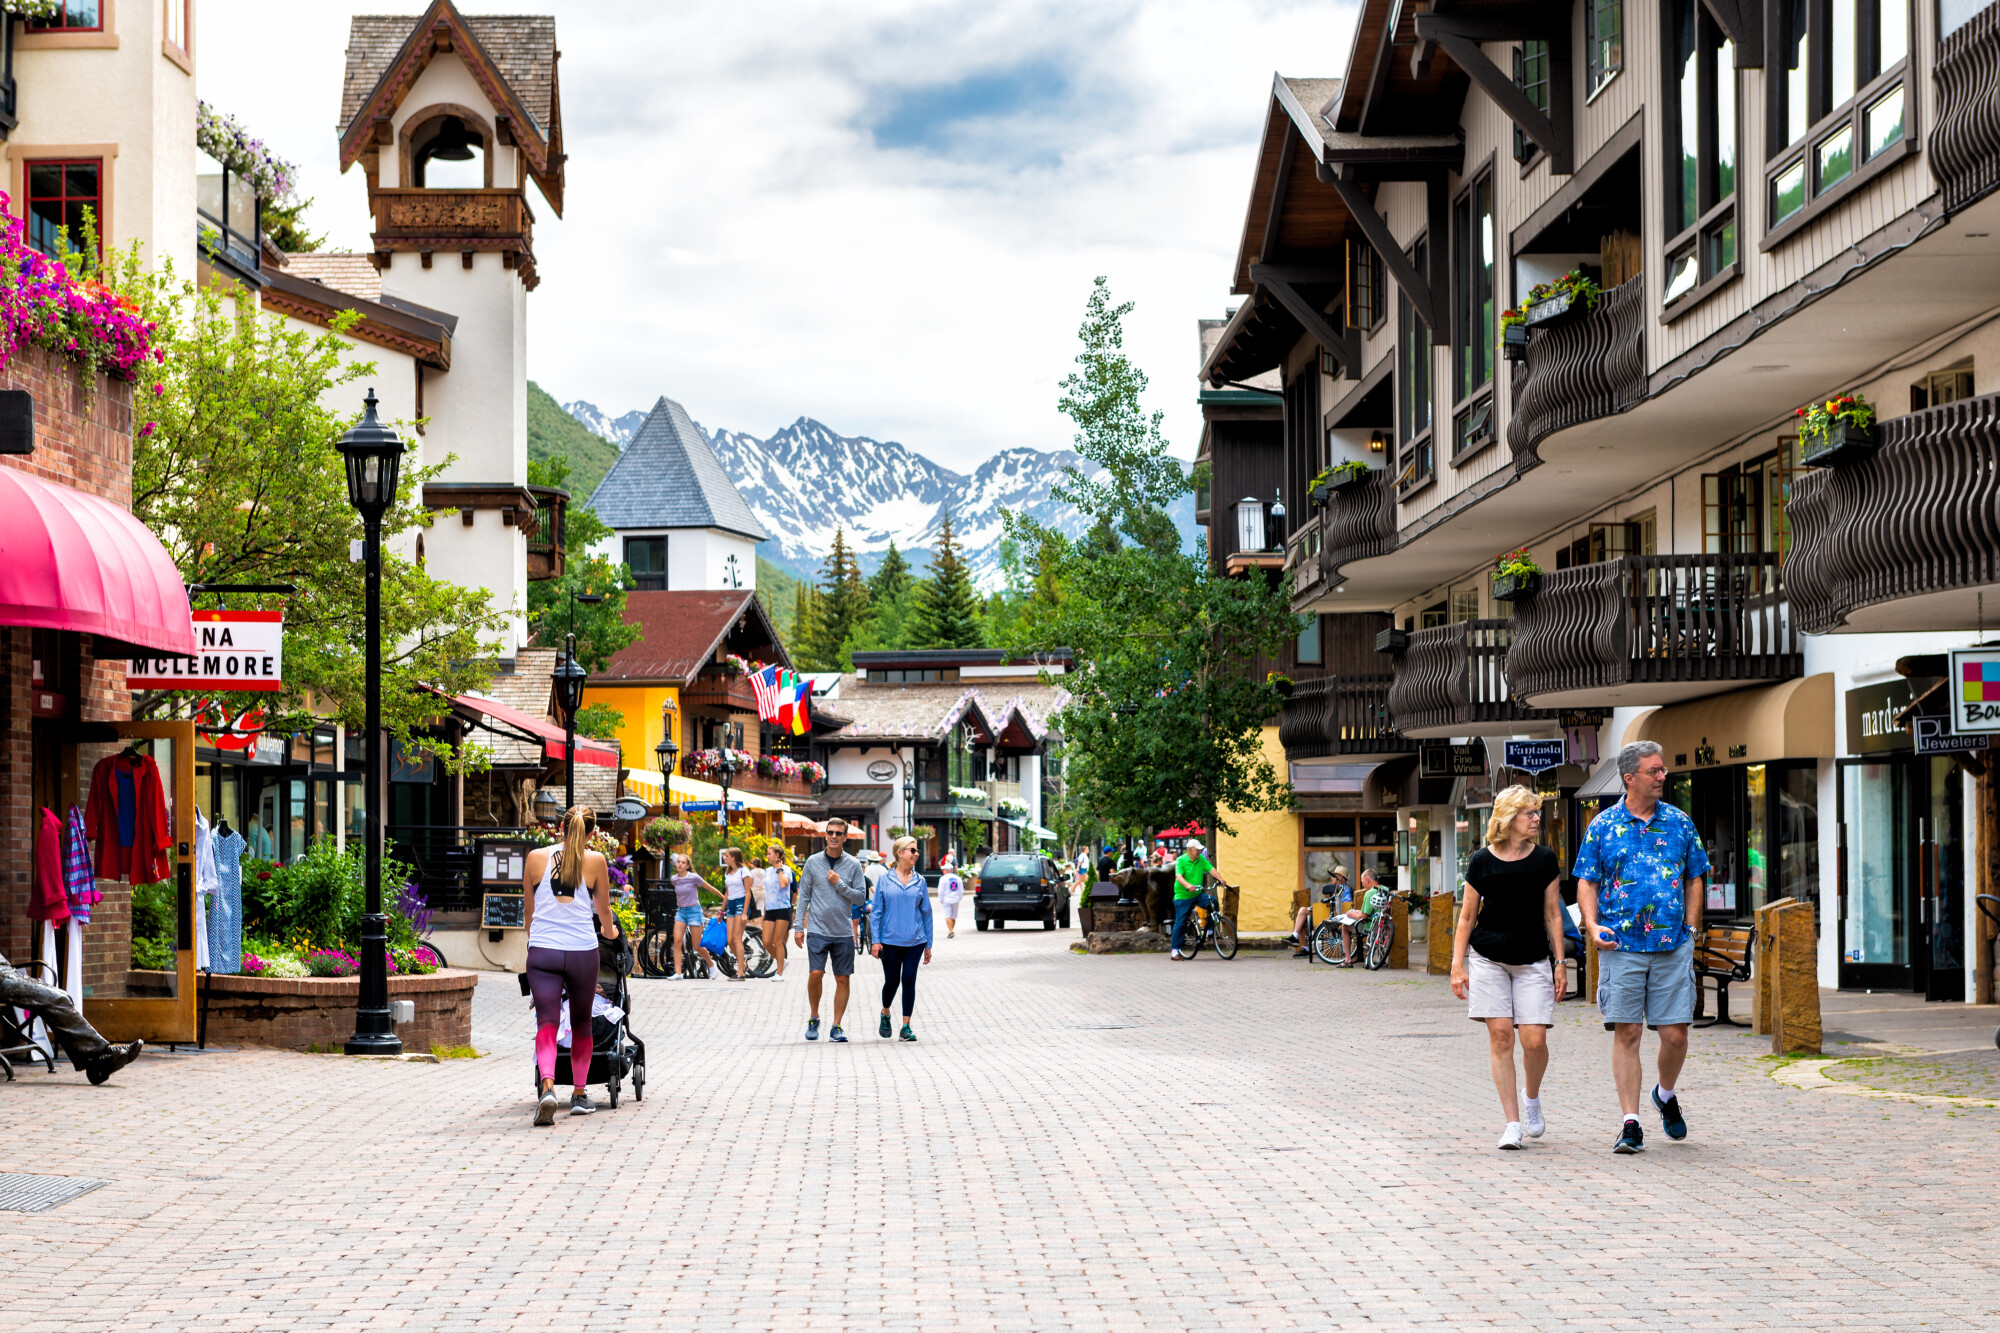 Vacation resort town of Vail, Colorado with people walking shopping by shops on Gore Creek drive